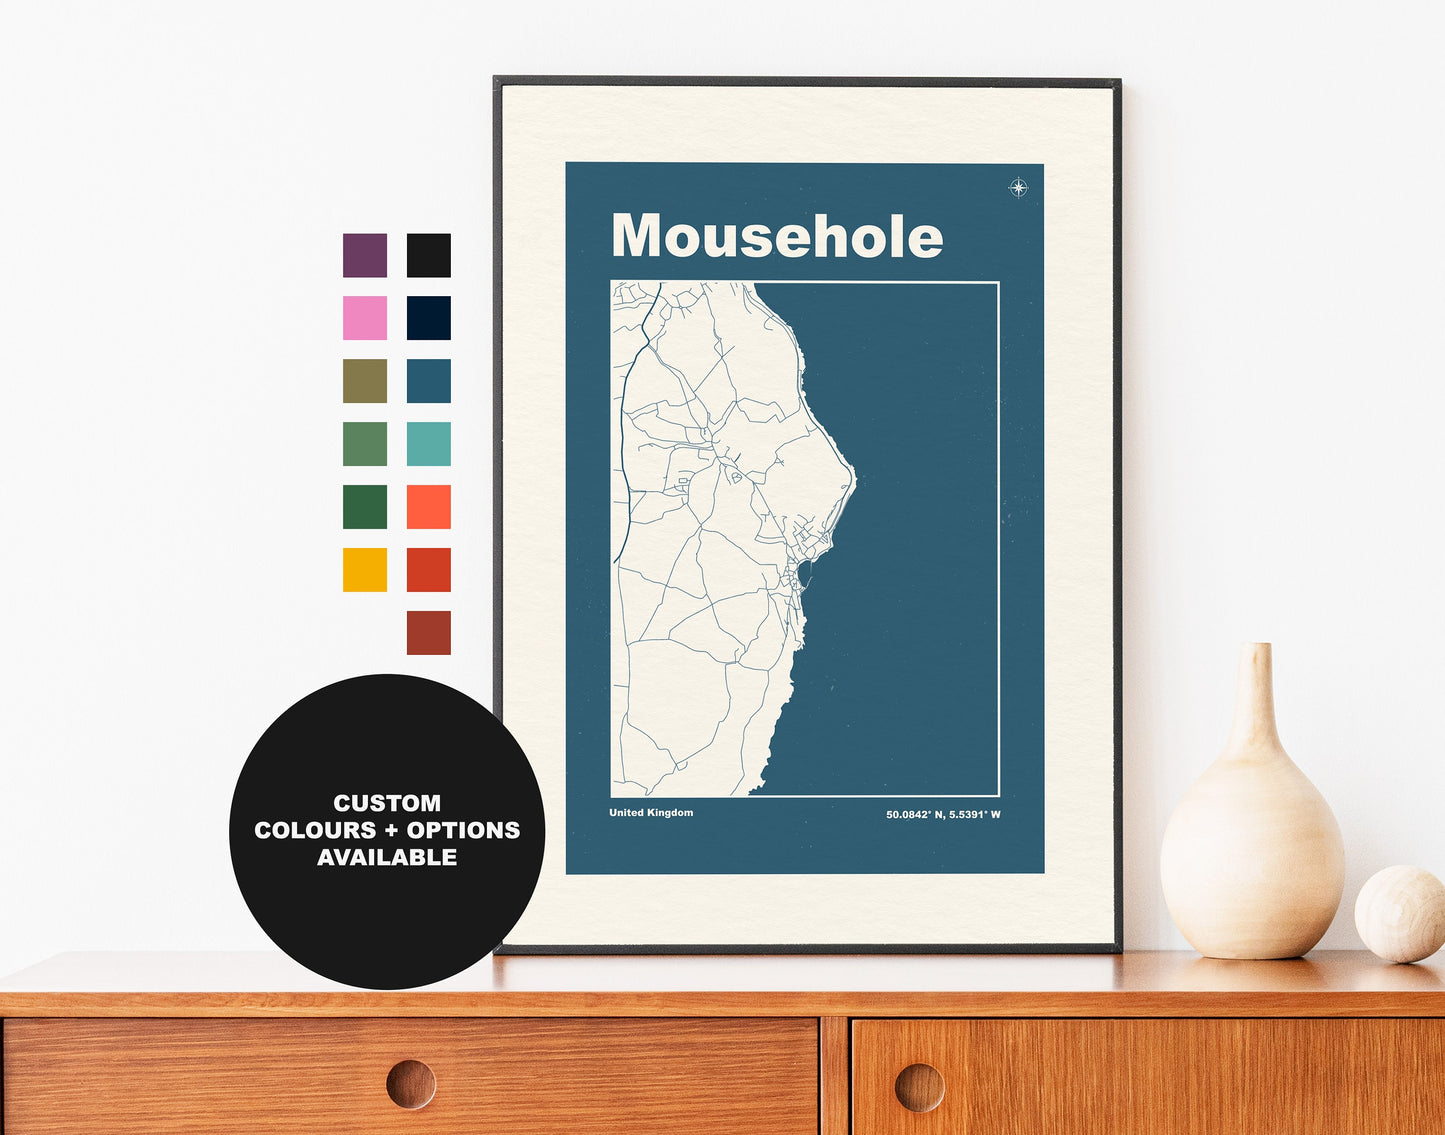 Mousehole Print - Map Print - Mid Century Modern  - Retro - Vintage - Contemporary - Mousehole Print - Map - Map Poster - Gift - Cornwall